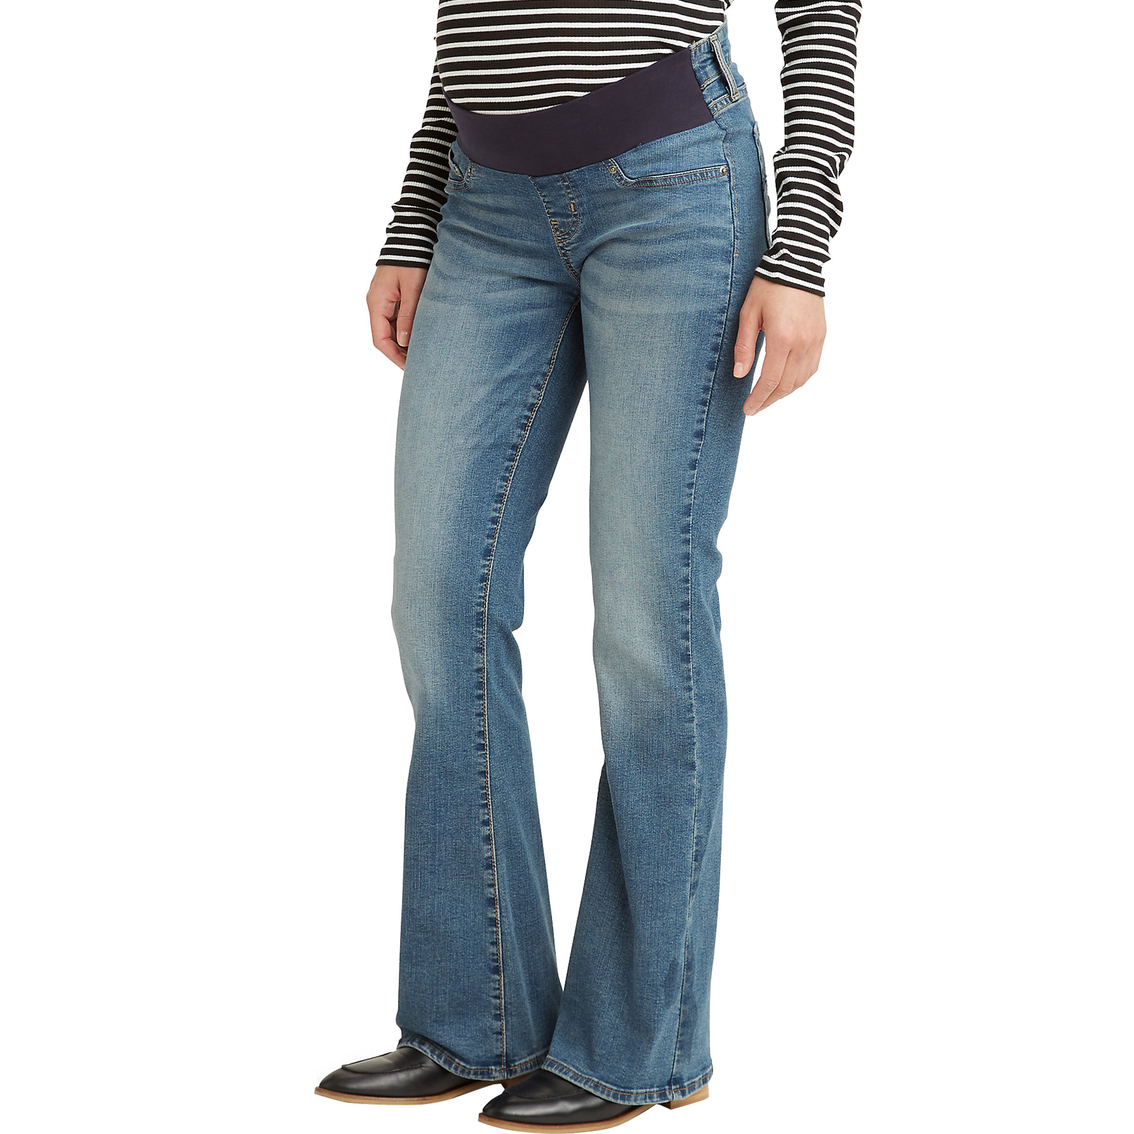 Levi's Maternity Baby Bump Bootcut Jeans | Jeans | Clothing ...